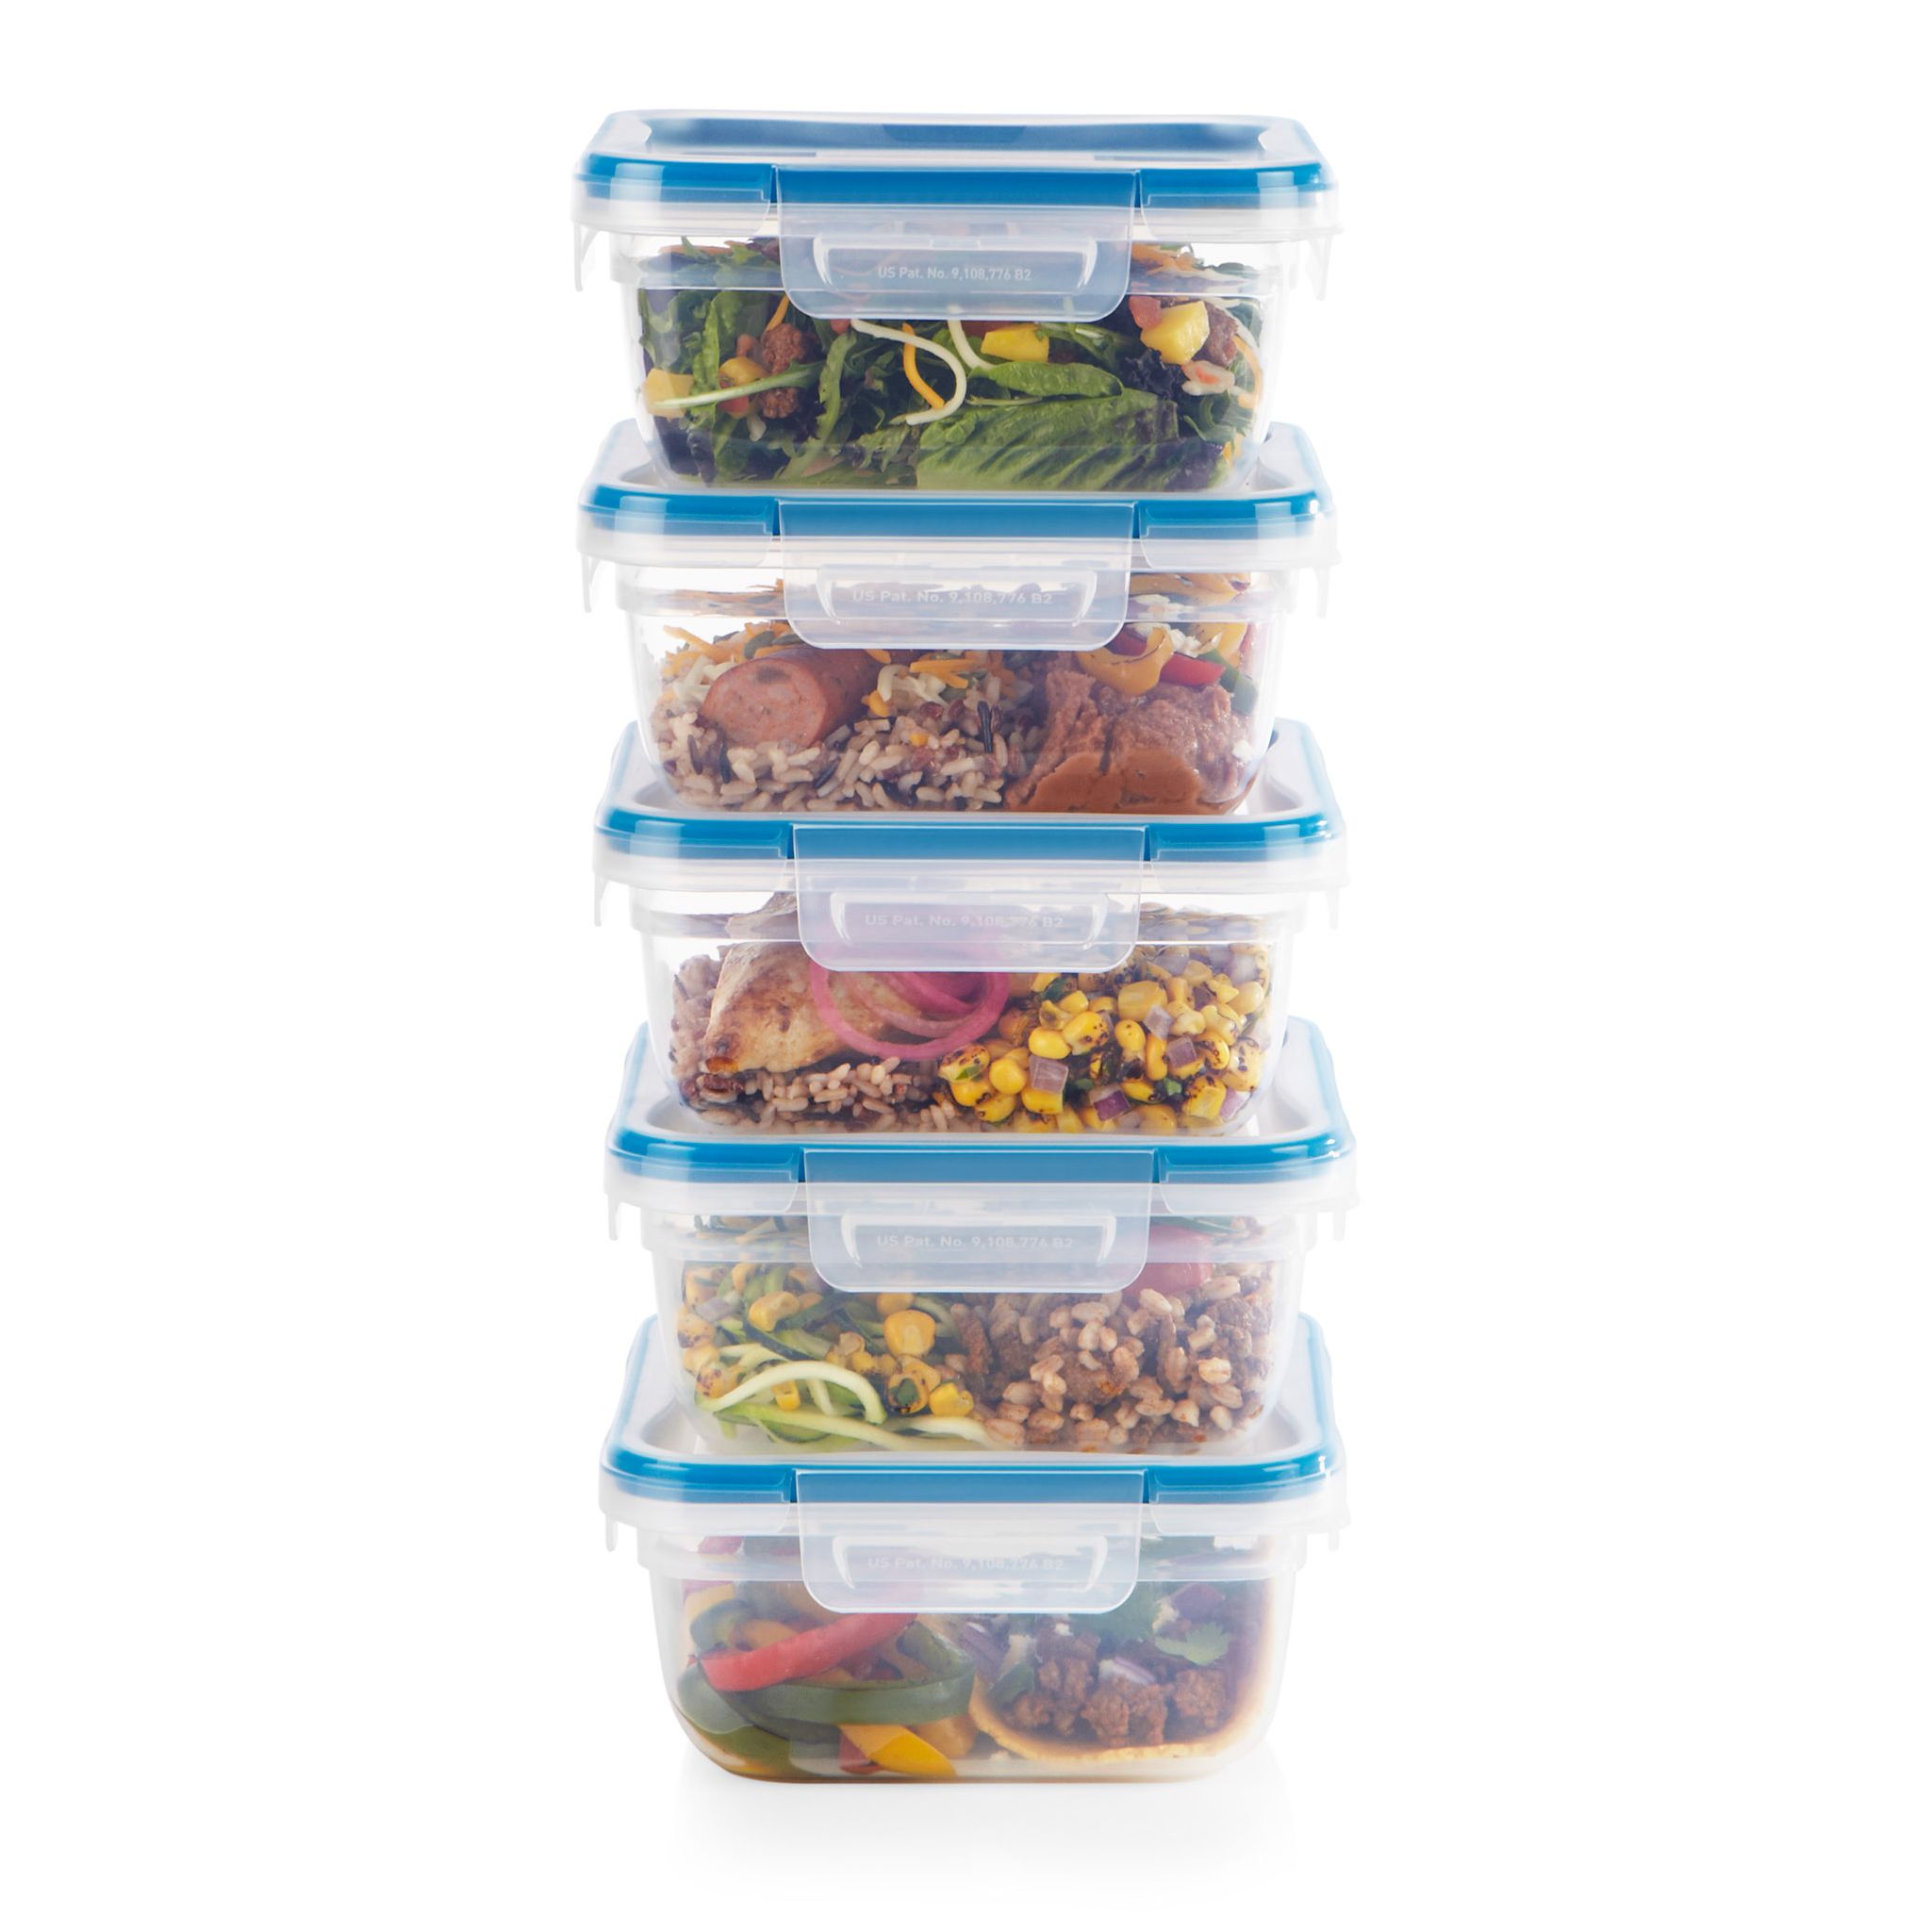 Snapware Plastic Food Storage Containers - 38-Piece Set - Bunting Online  Auctions